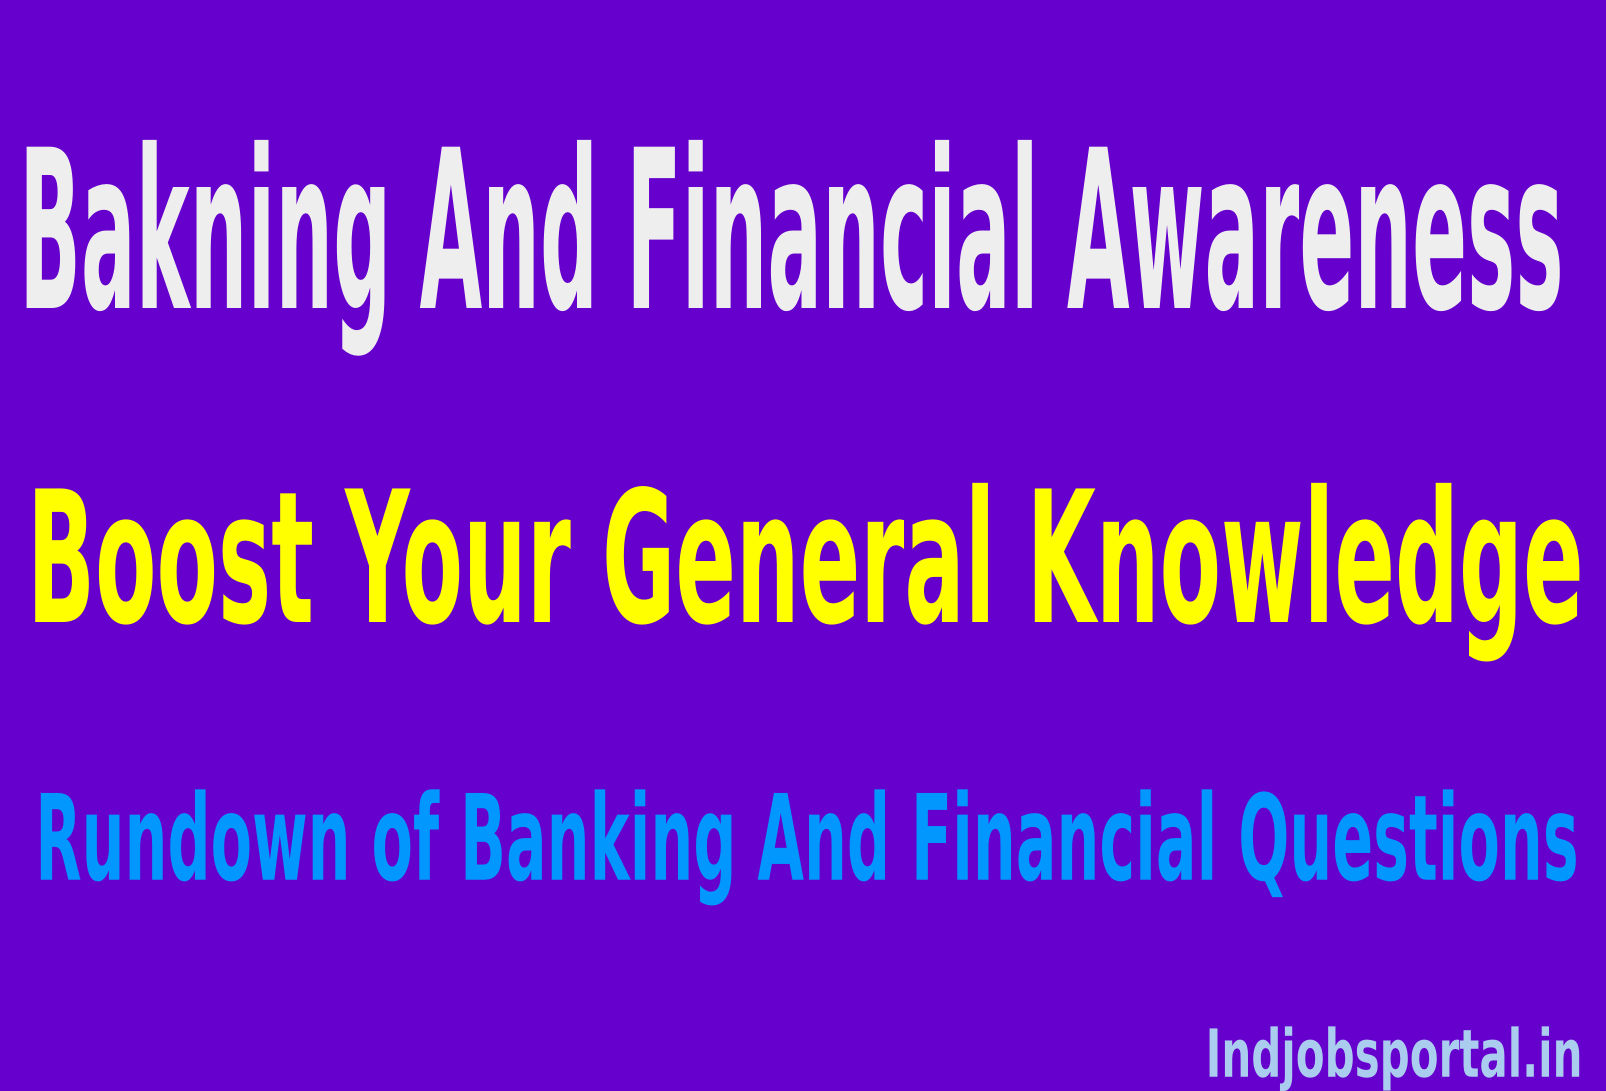 Boost Your General Knowledge: Rundown of Some Banking And Financial Awareness Questions